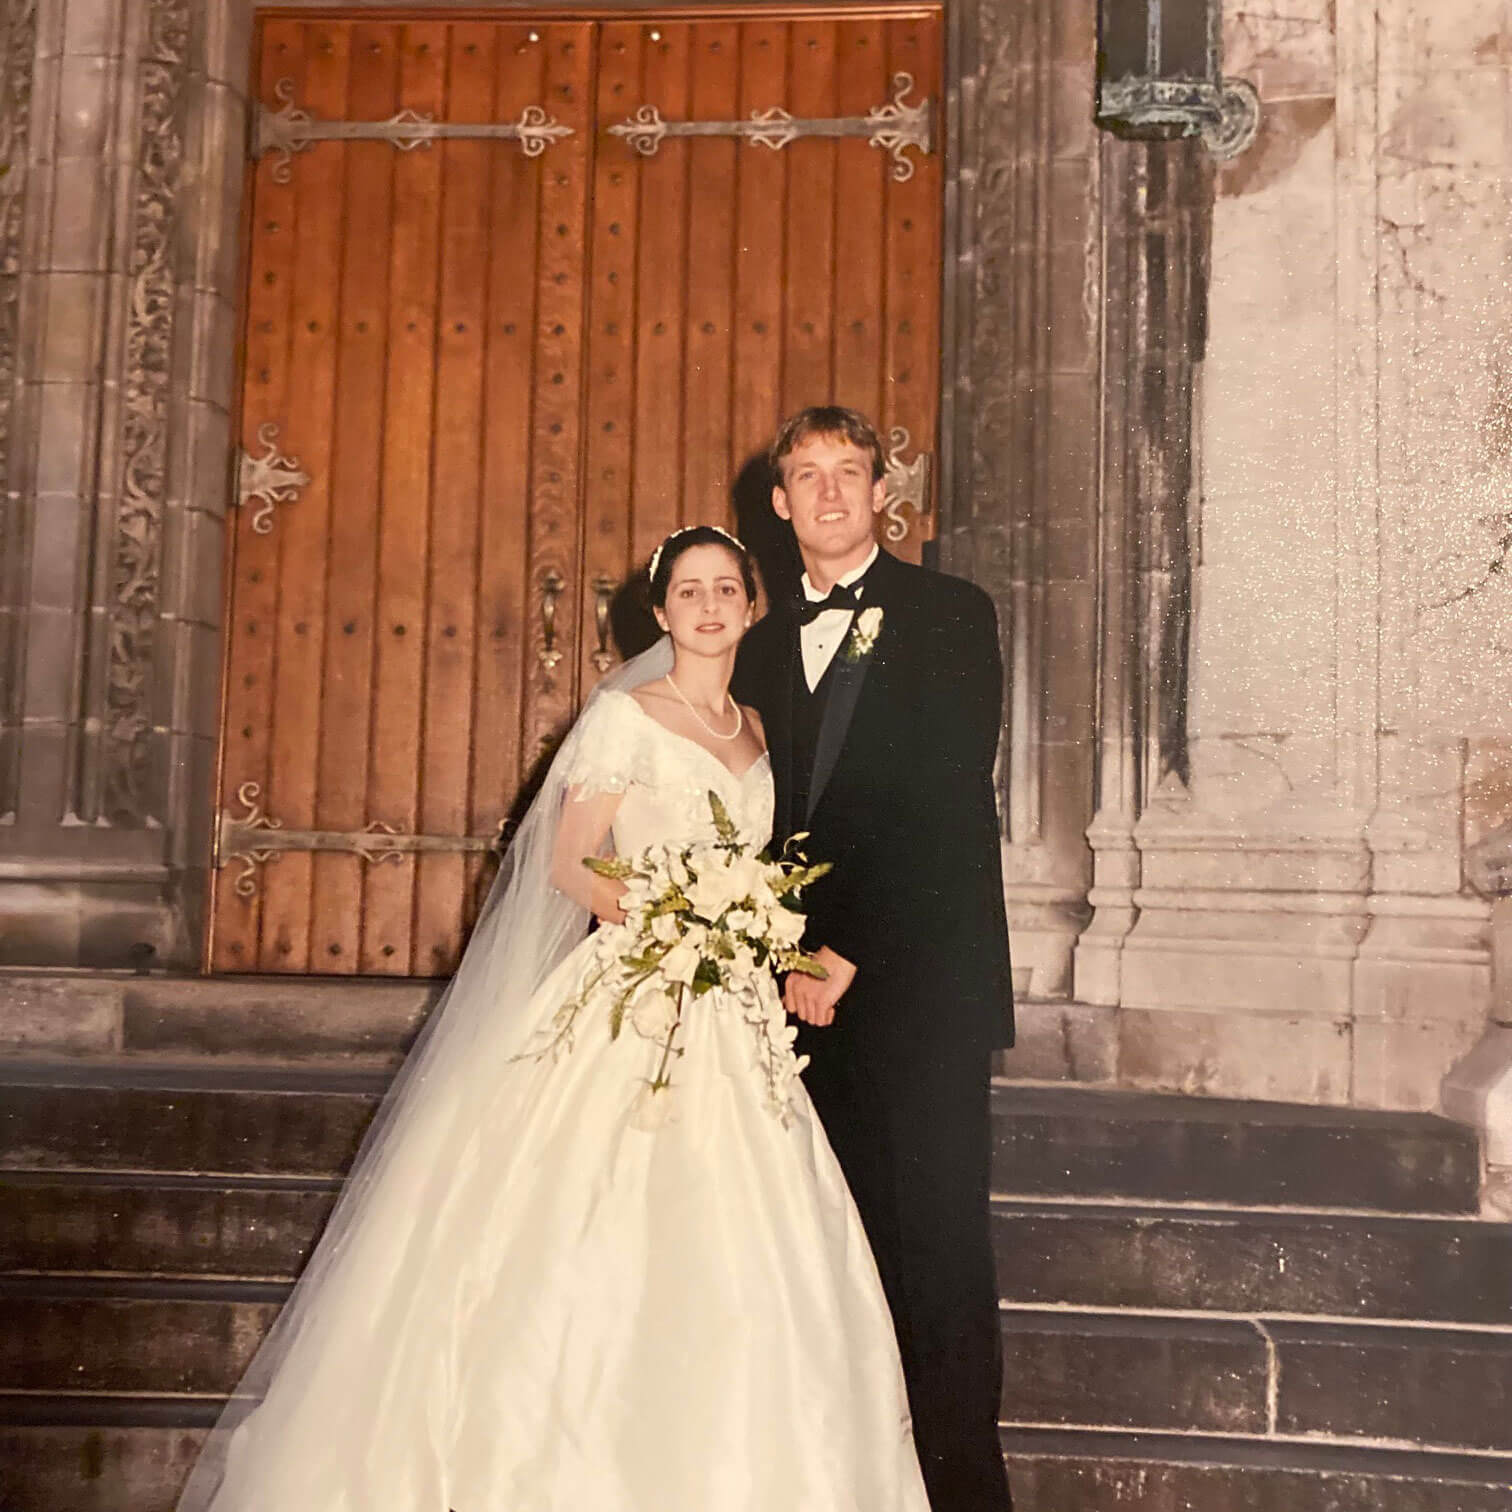 Jason and Ali Erk posing before a large wooden door on Lehigh's campus after their wedding reception.